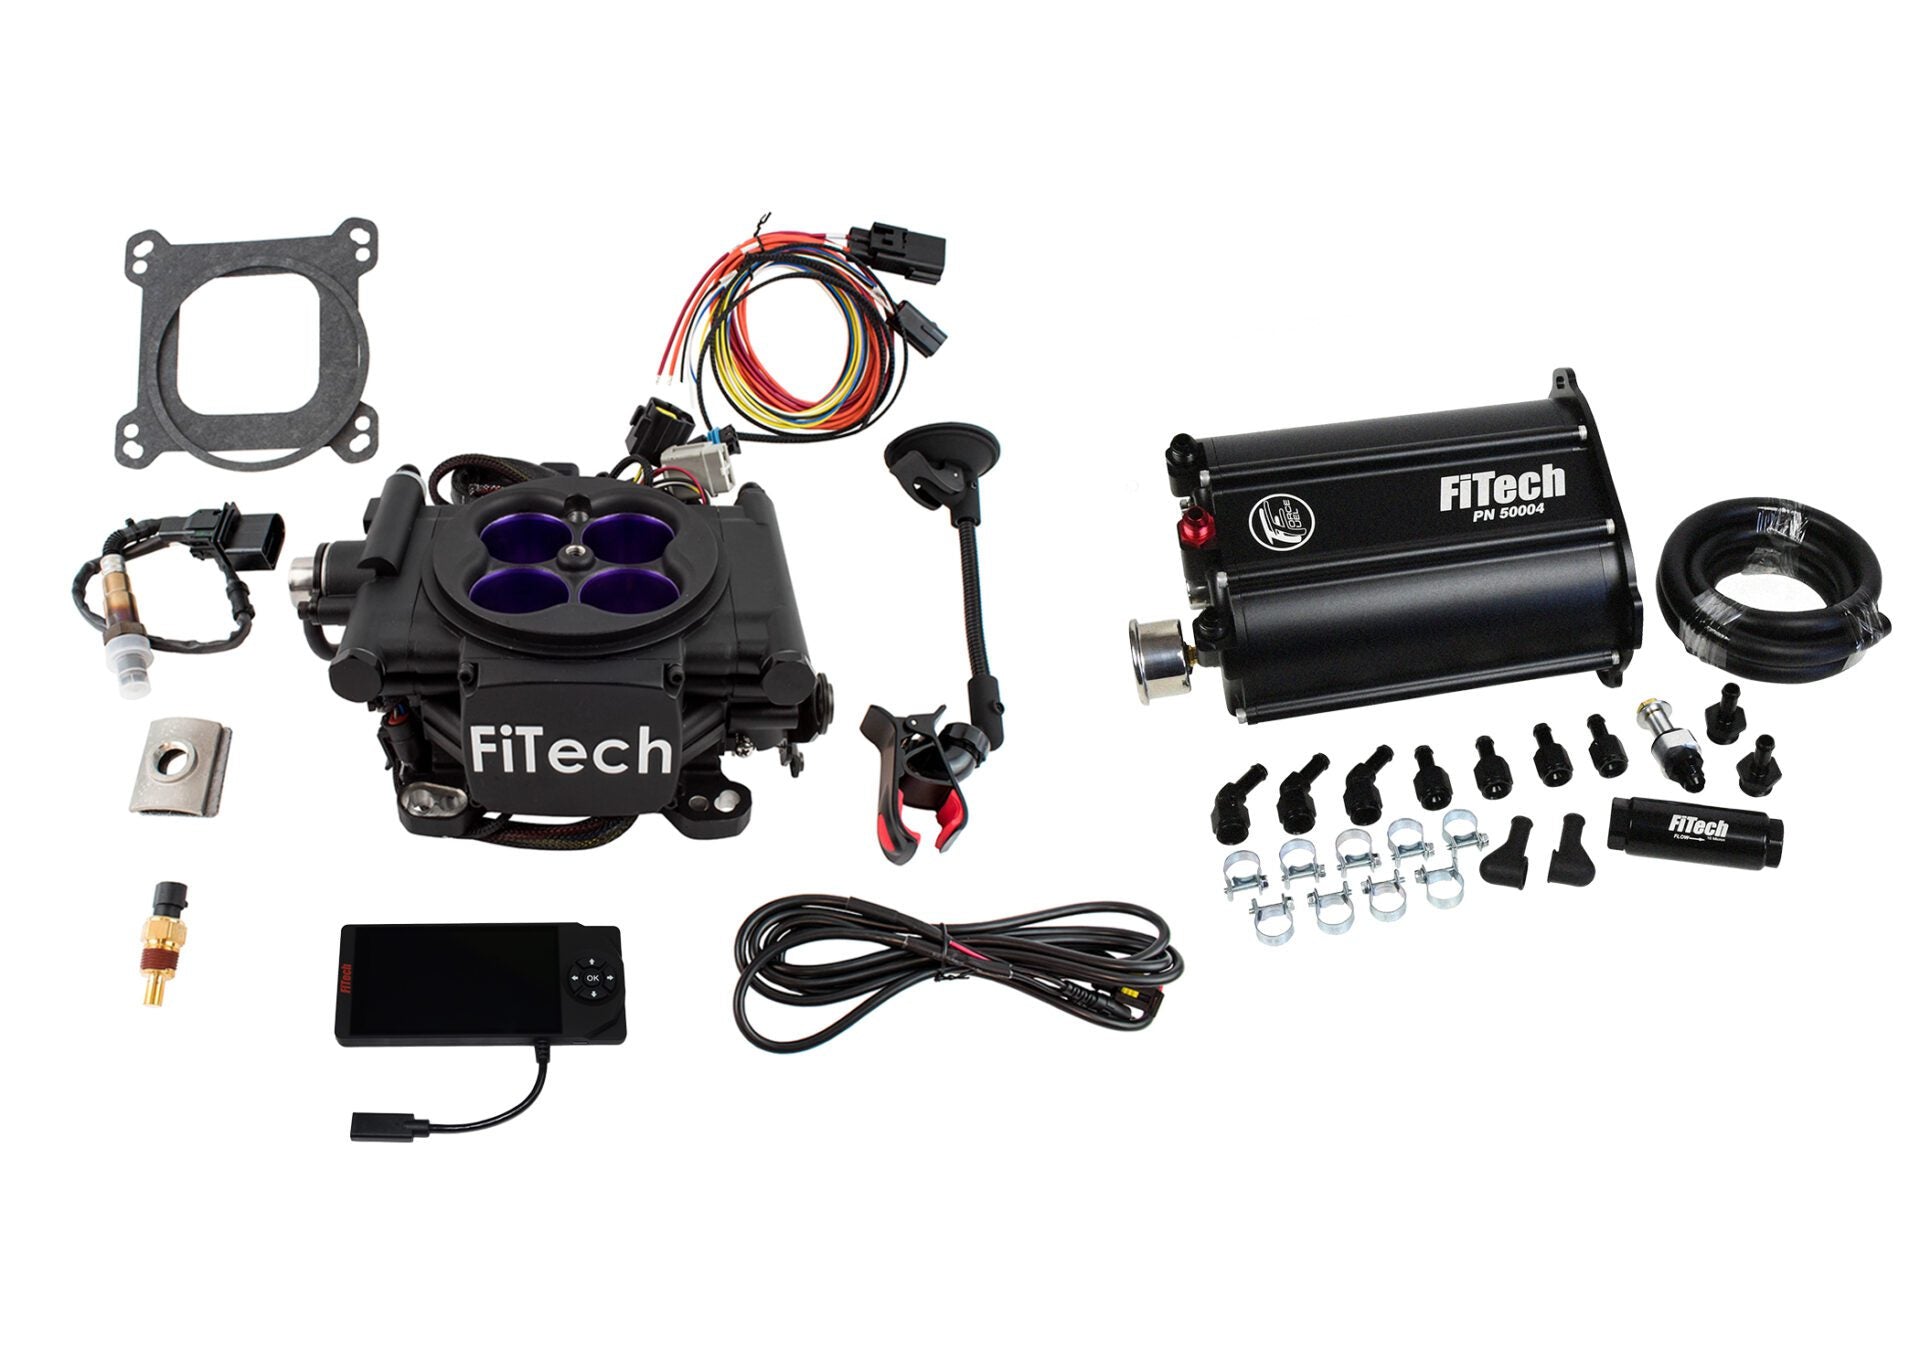 FiTech 35208 Mean Street EFI System Master Kit w/ Force Fuel, Fuel Delivery System